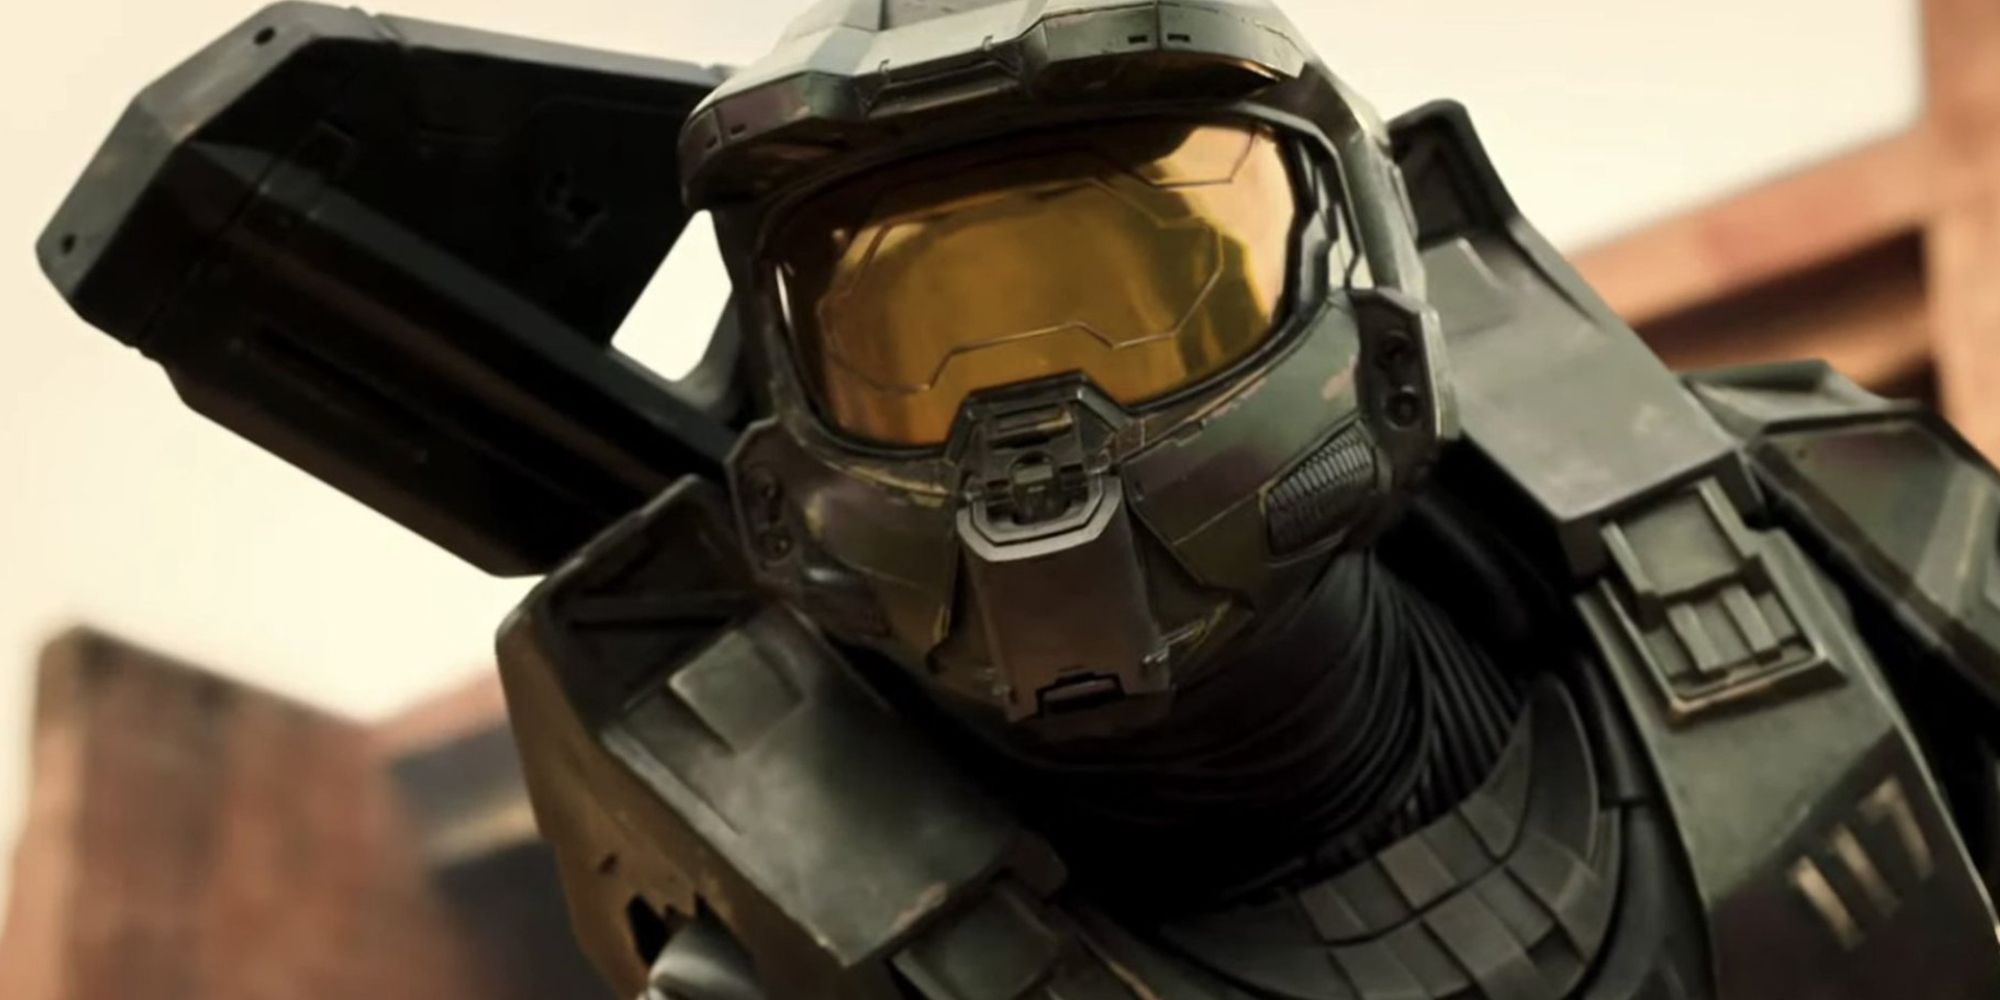 Halo TV Series Episode 1 and 2 Review- A Tale of Two Contrasting